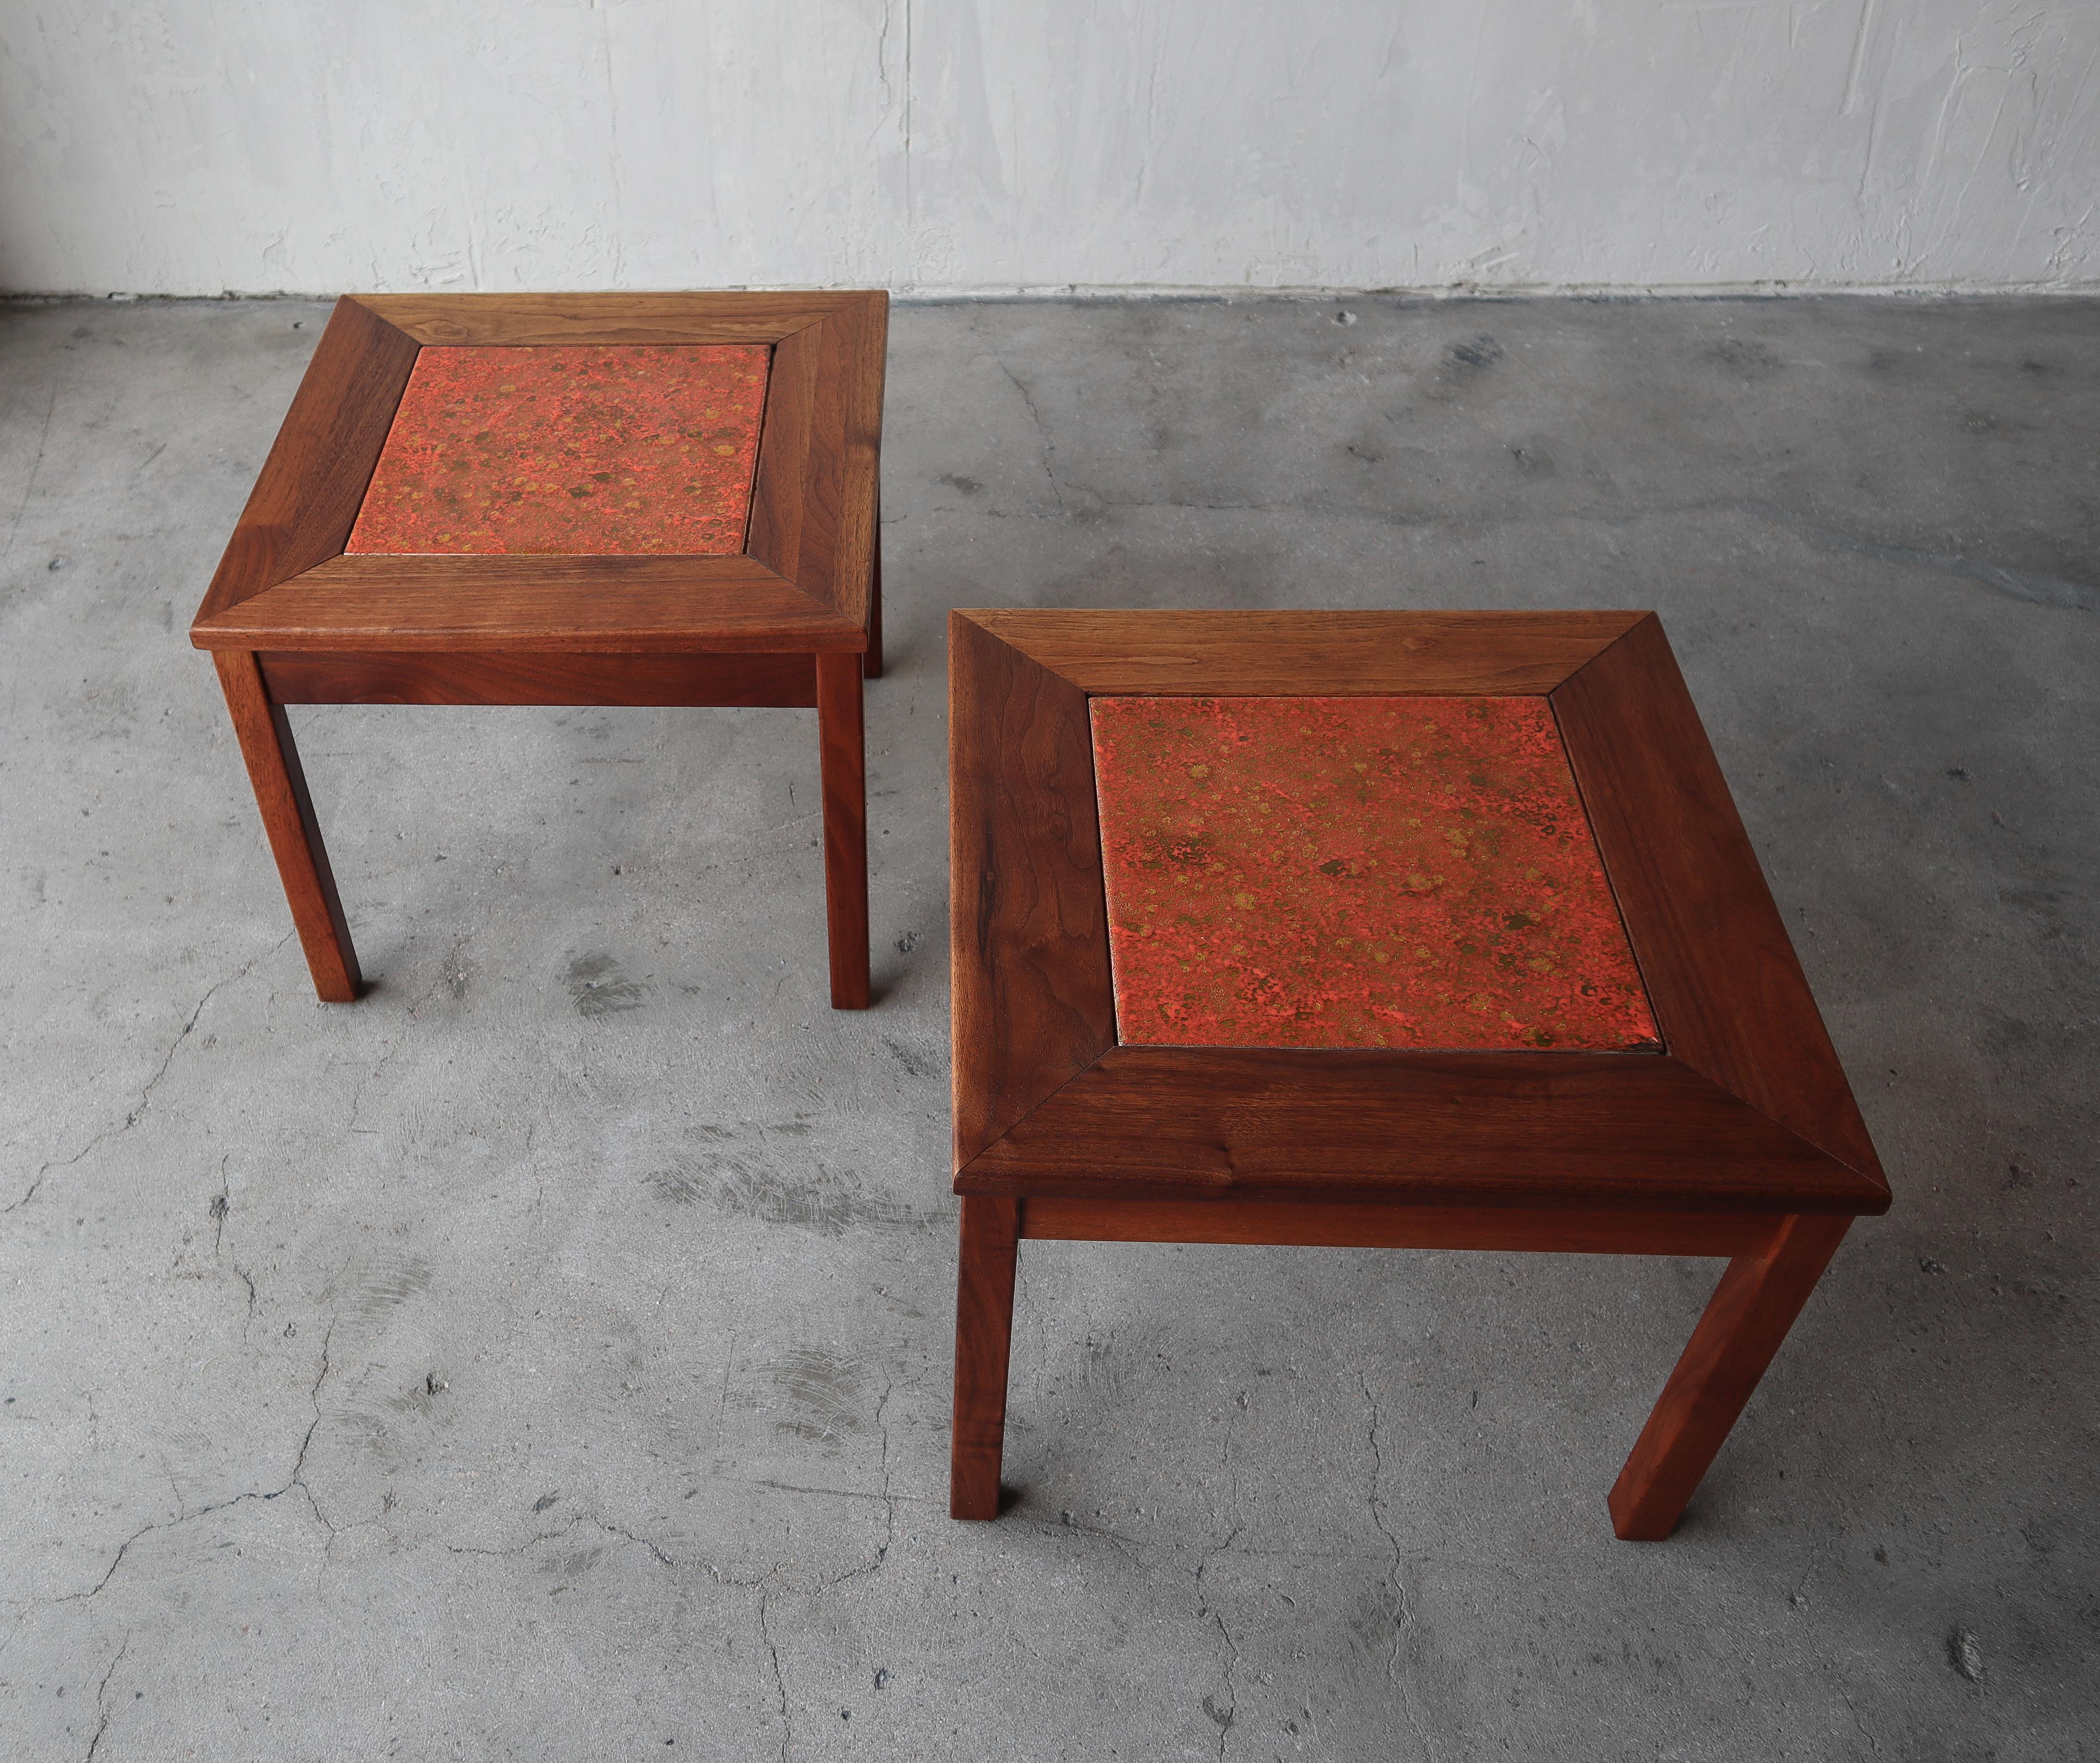 Nice set of authentic midcentury walnut side tables with enameled copper inlay by Brown Saltman. Fun, classic pieces.

Tables are in great vintage condition overall. One chip to the enamel, please see last image.